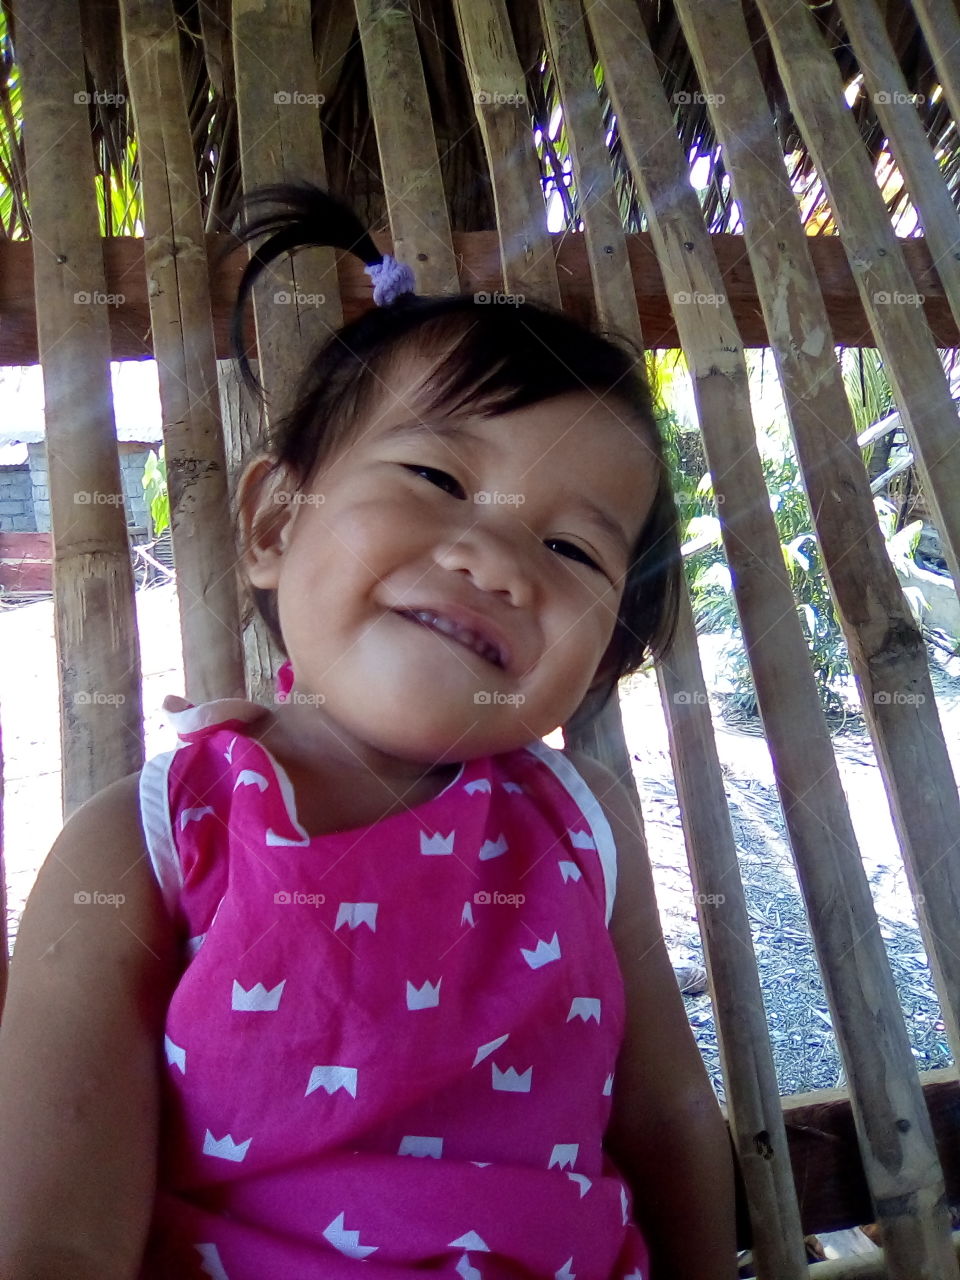 Who says she's not cute? 

I called my baby sister and shouted "smile!" then this is what I've captured. She's so cute!